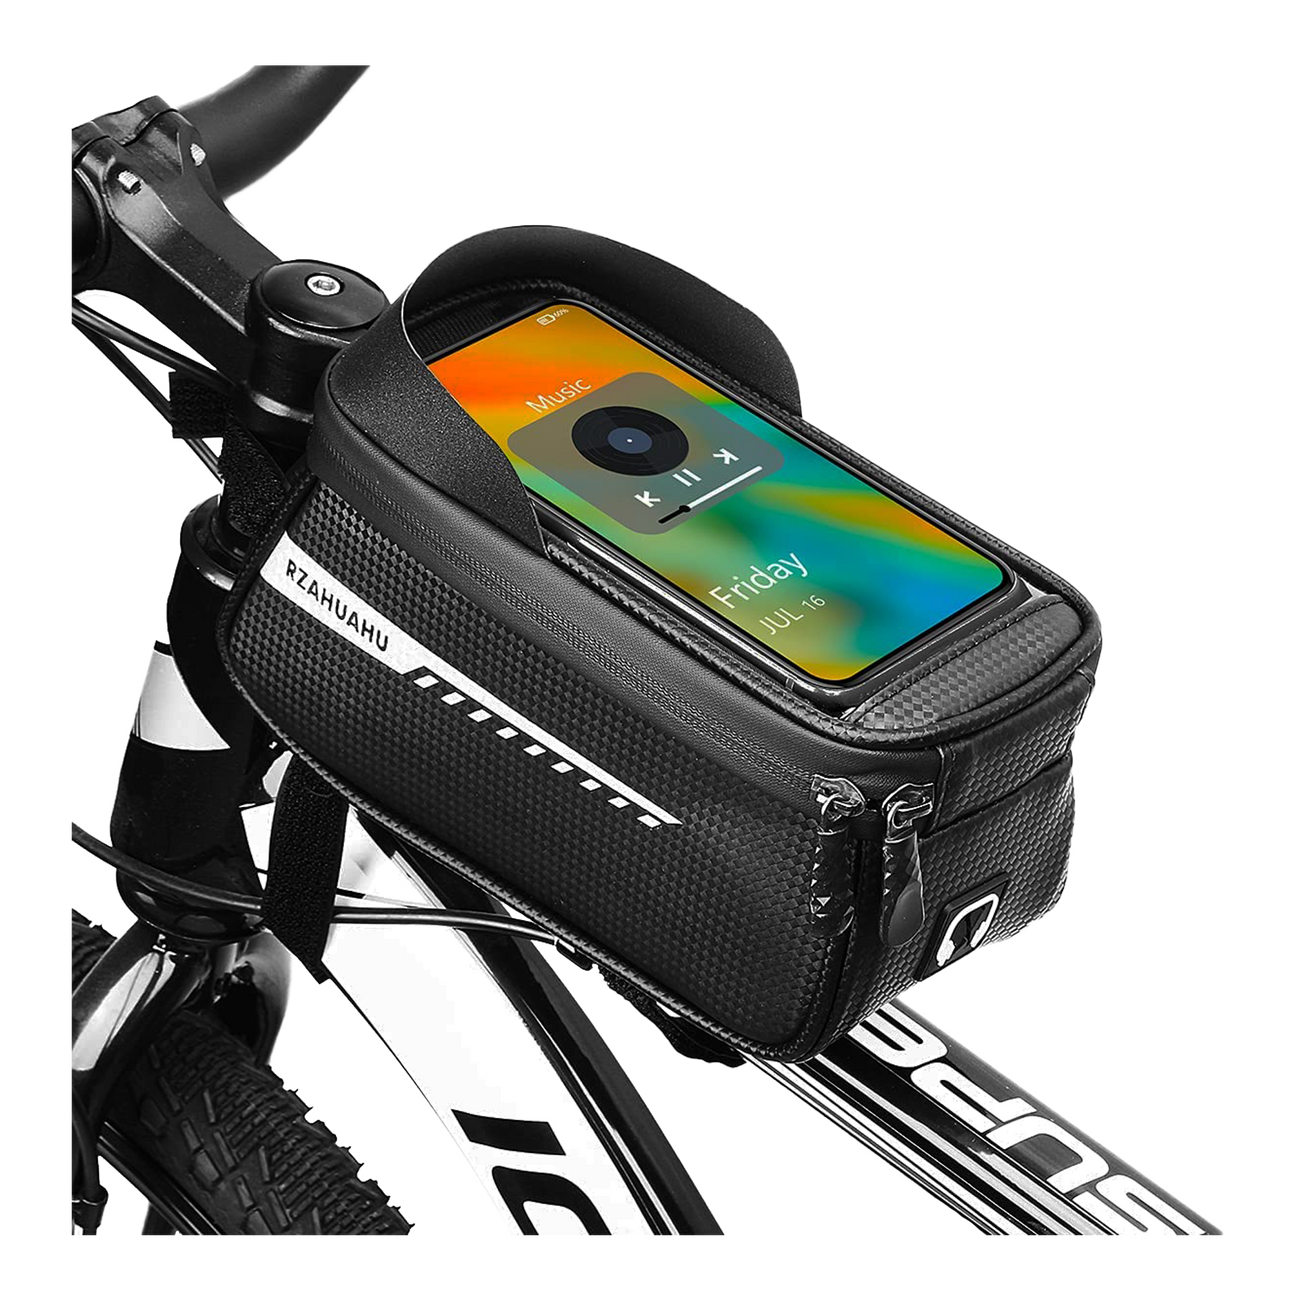 Rzahuahu Cycle Bag | Voltes - Electric Mobility